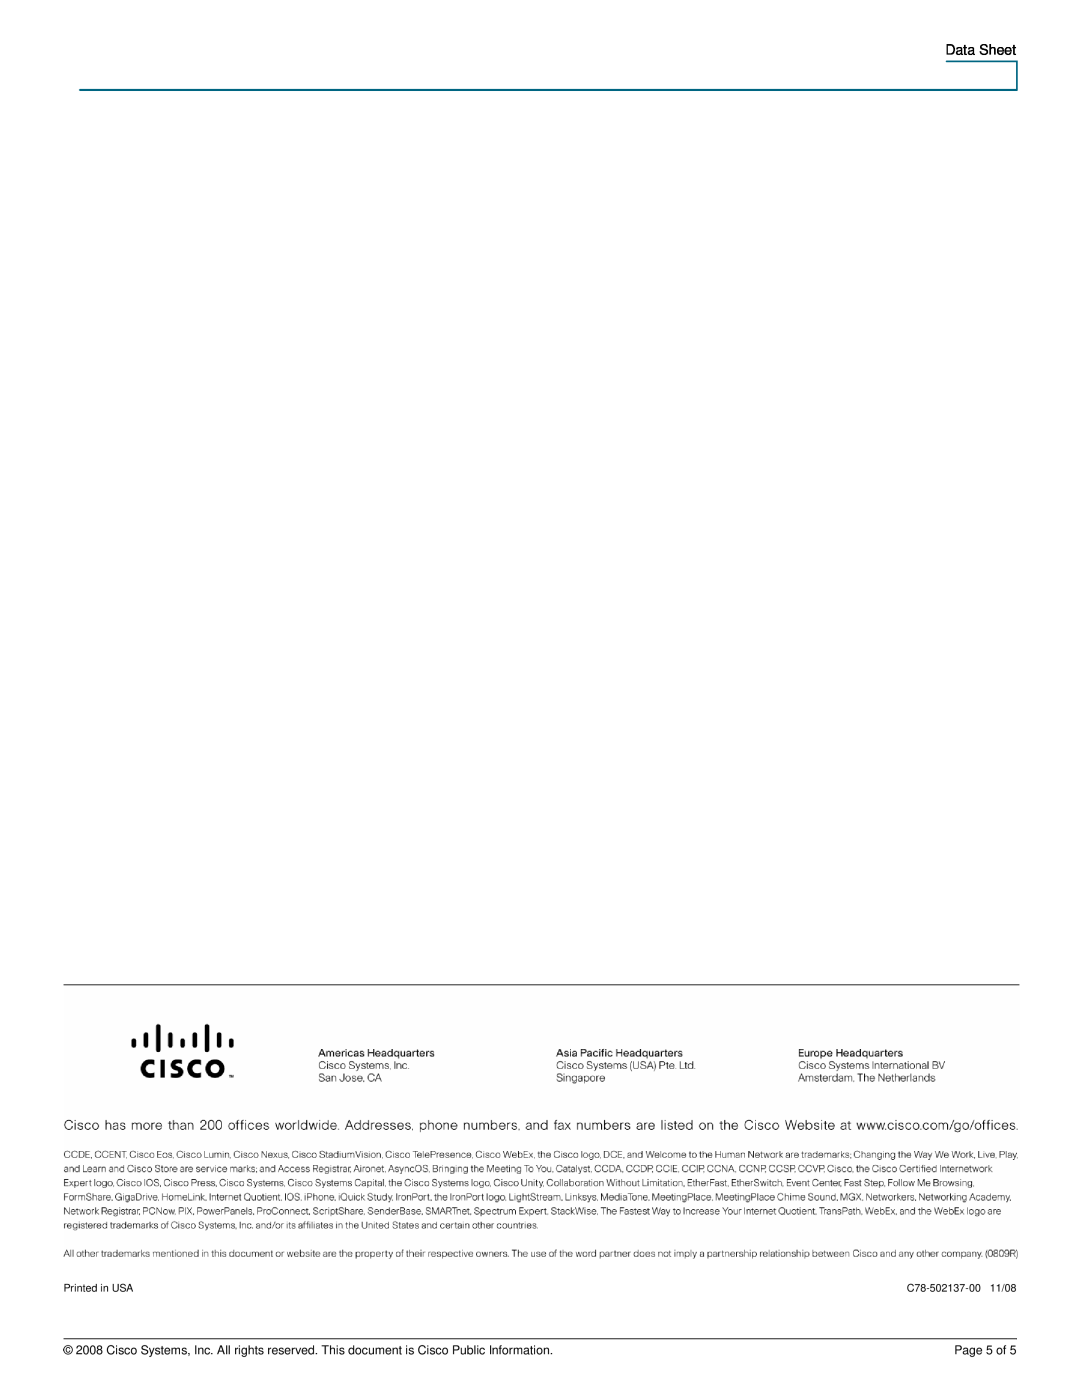 Cisco Systems SPA2102 manual Data Sheet, C78-502137-00 11/08, Page 5 of 